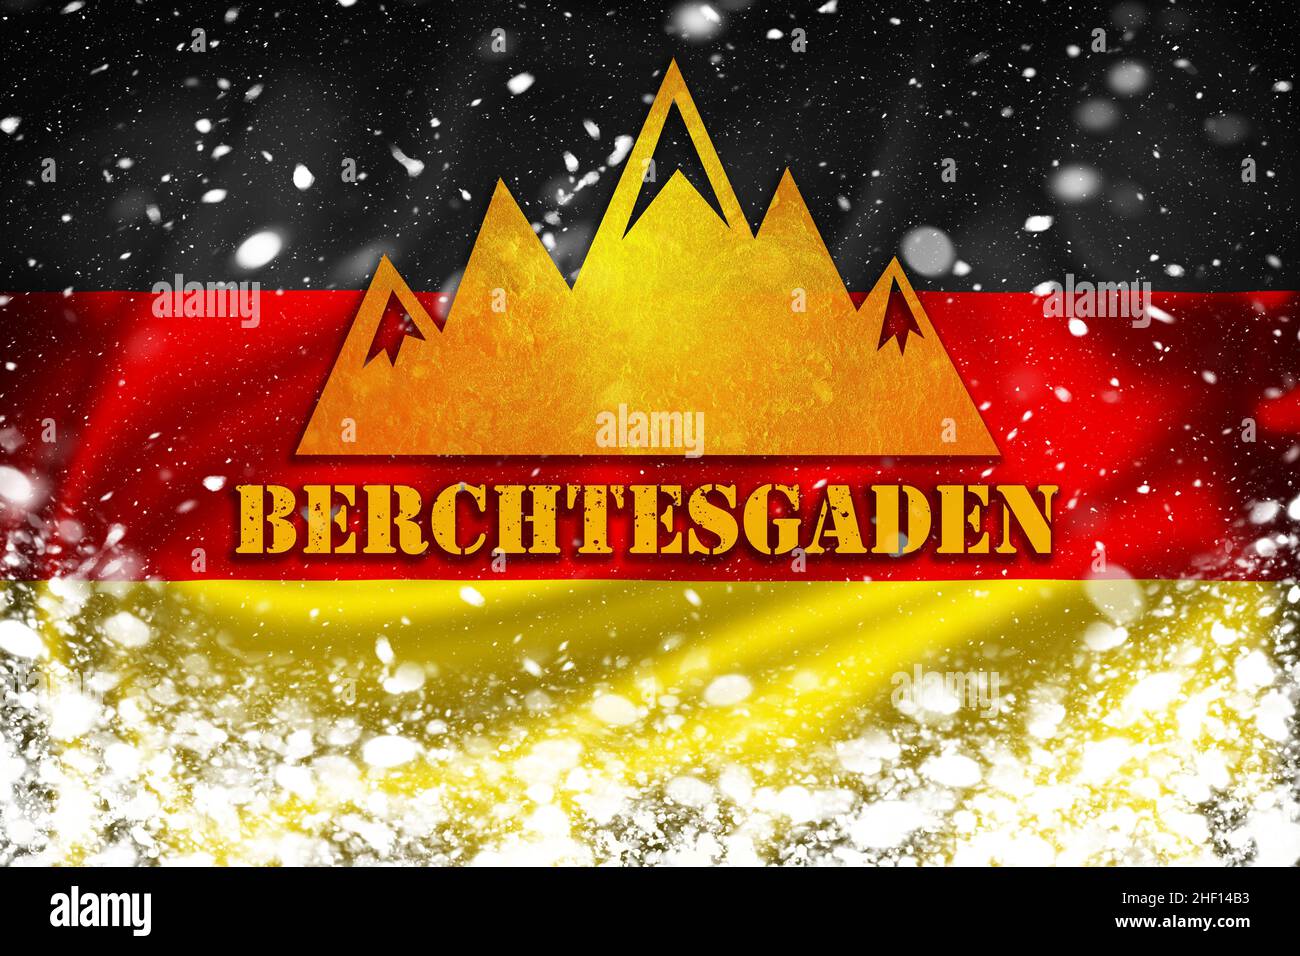 Berchtesgaden banner illustration on German flag and snow layer, famous destination in Alps, Germany Stock Photo